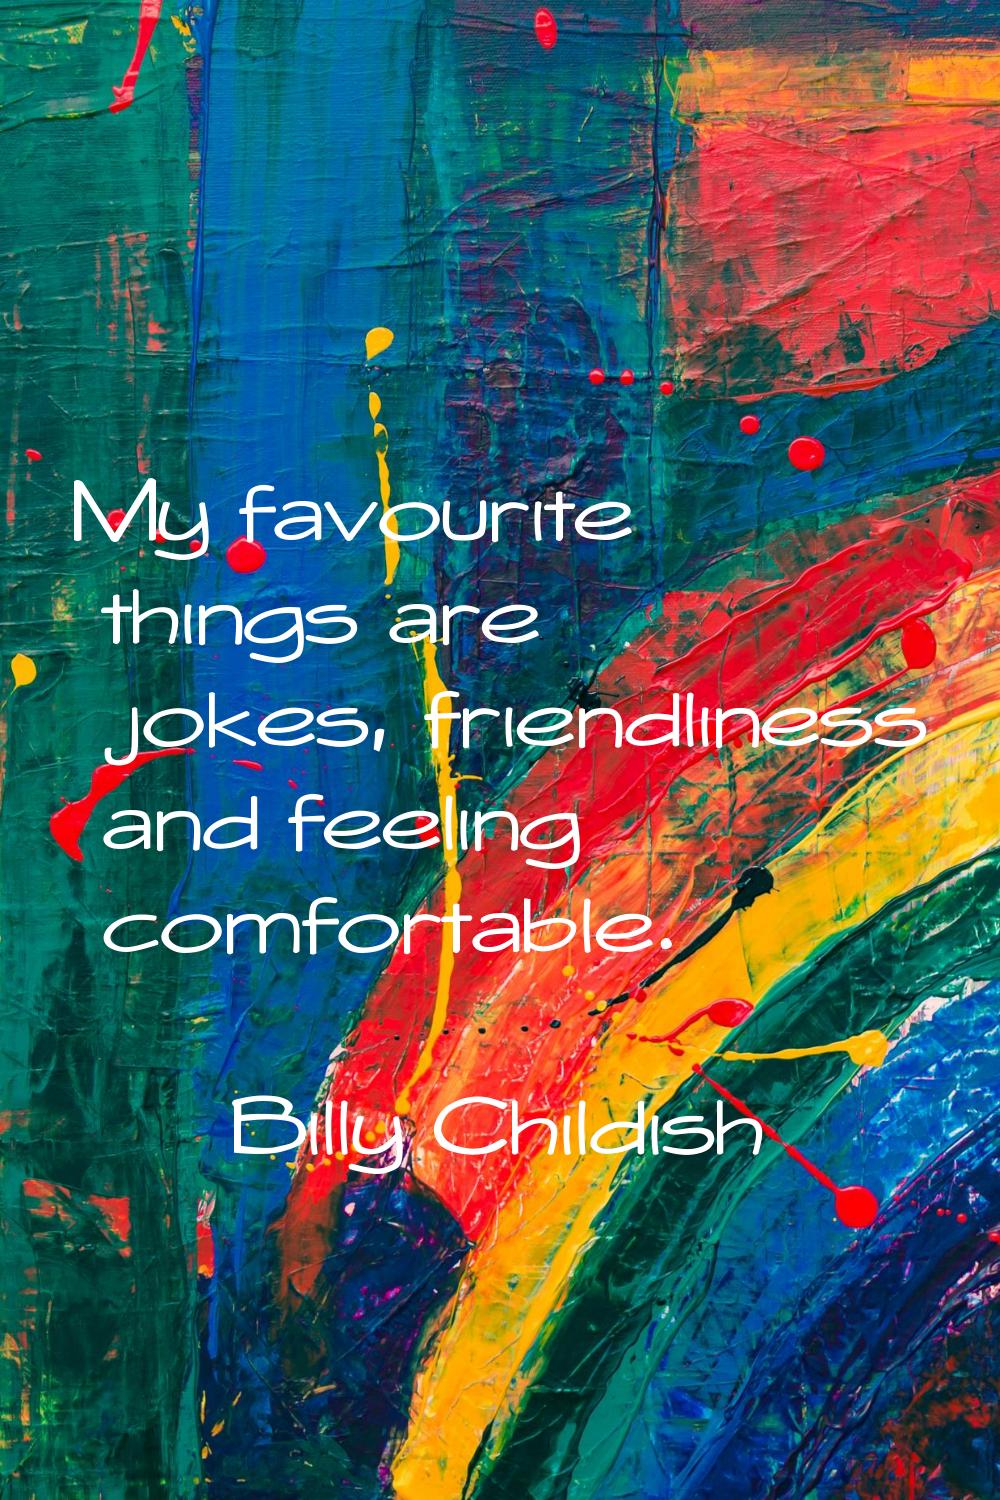 My favourite things are jokes, friendliness and feeling comfortable.